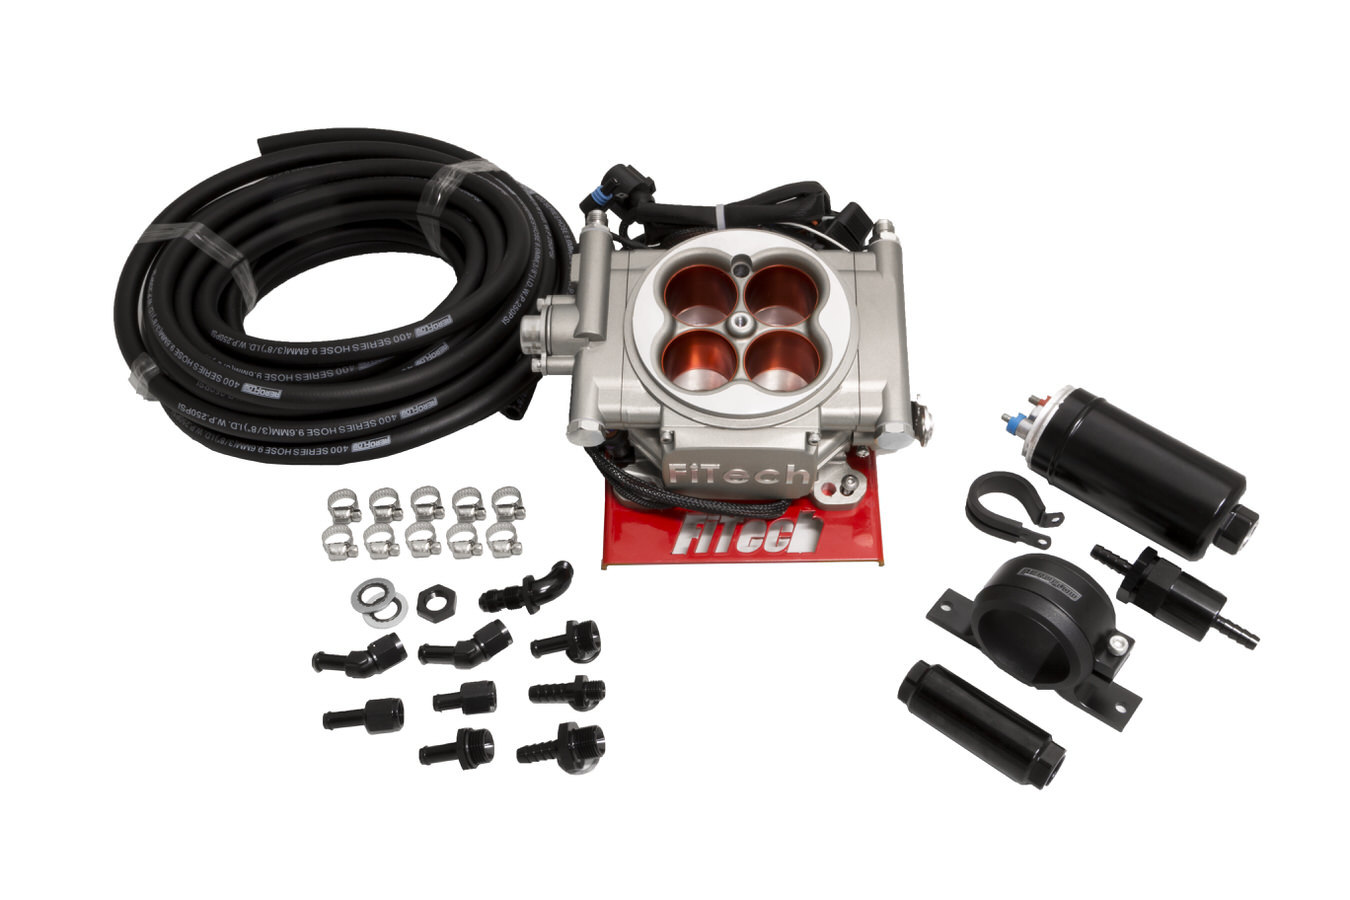 FiTech Fuel Injection 31003 Fuel Injection, Go Street EFI, Master Kit, Throttle Body, Square Bore, 62 lb/hr Injectors, Aluminum, Silver Anodized, Universal, Kit